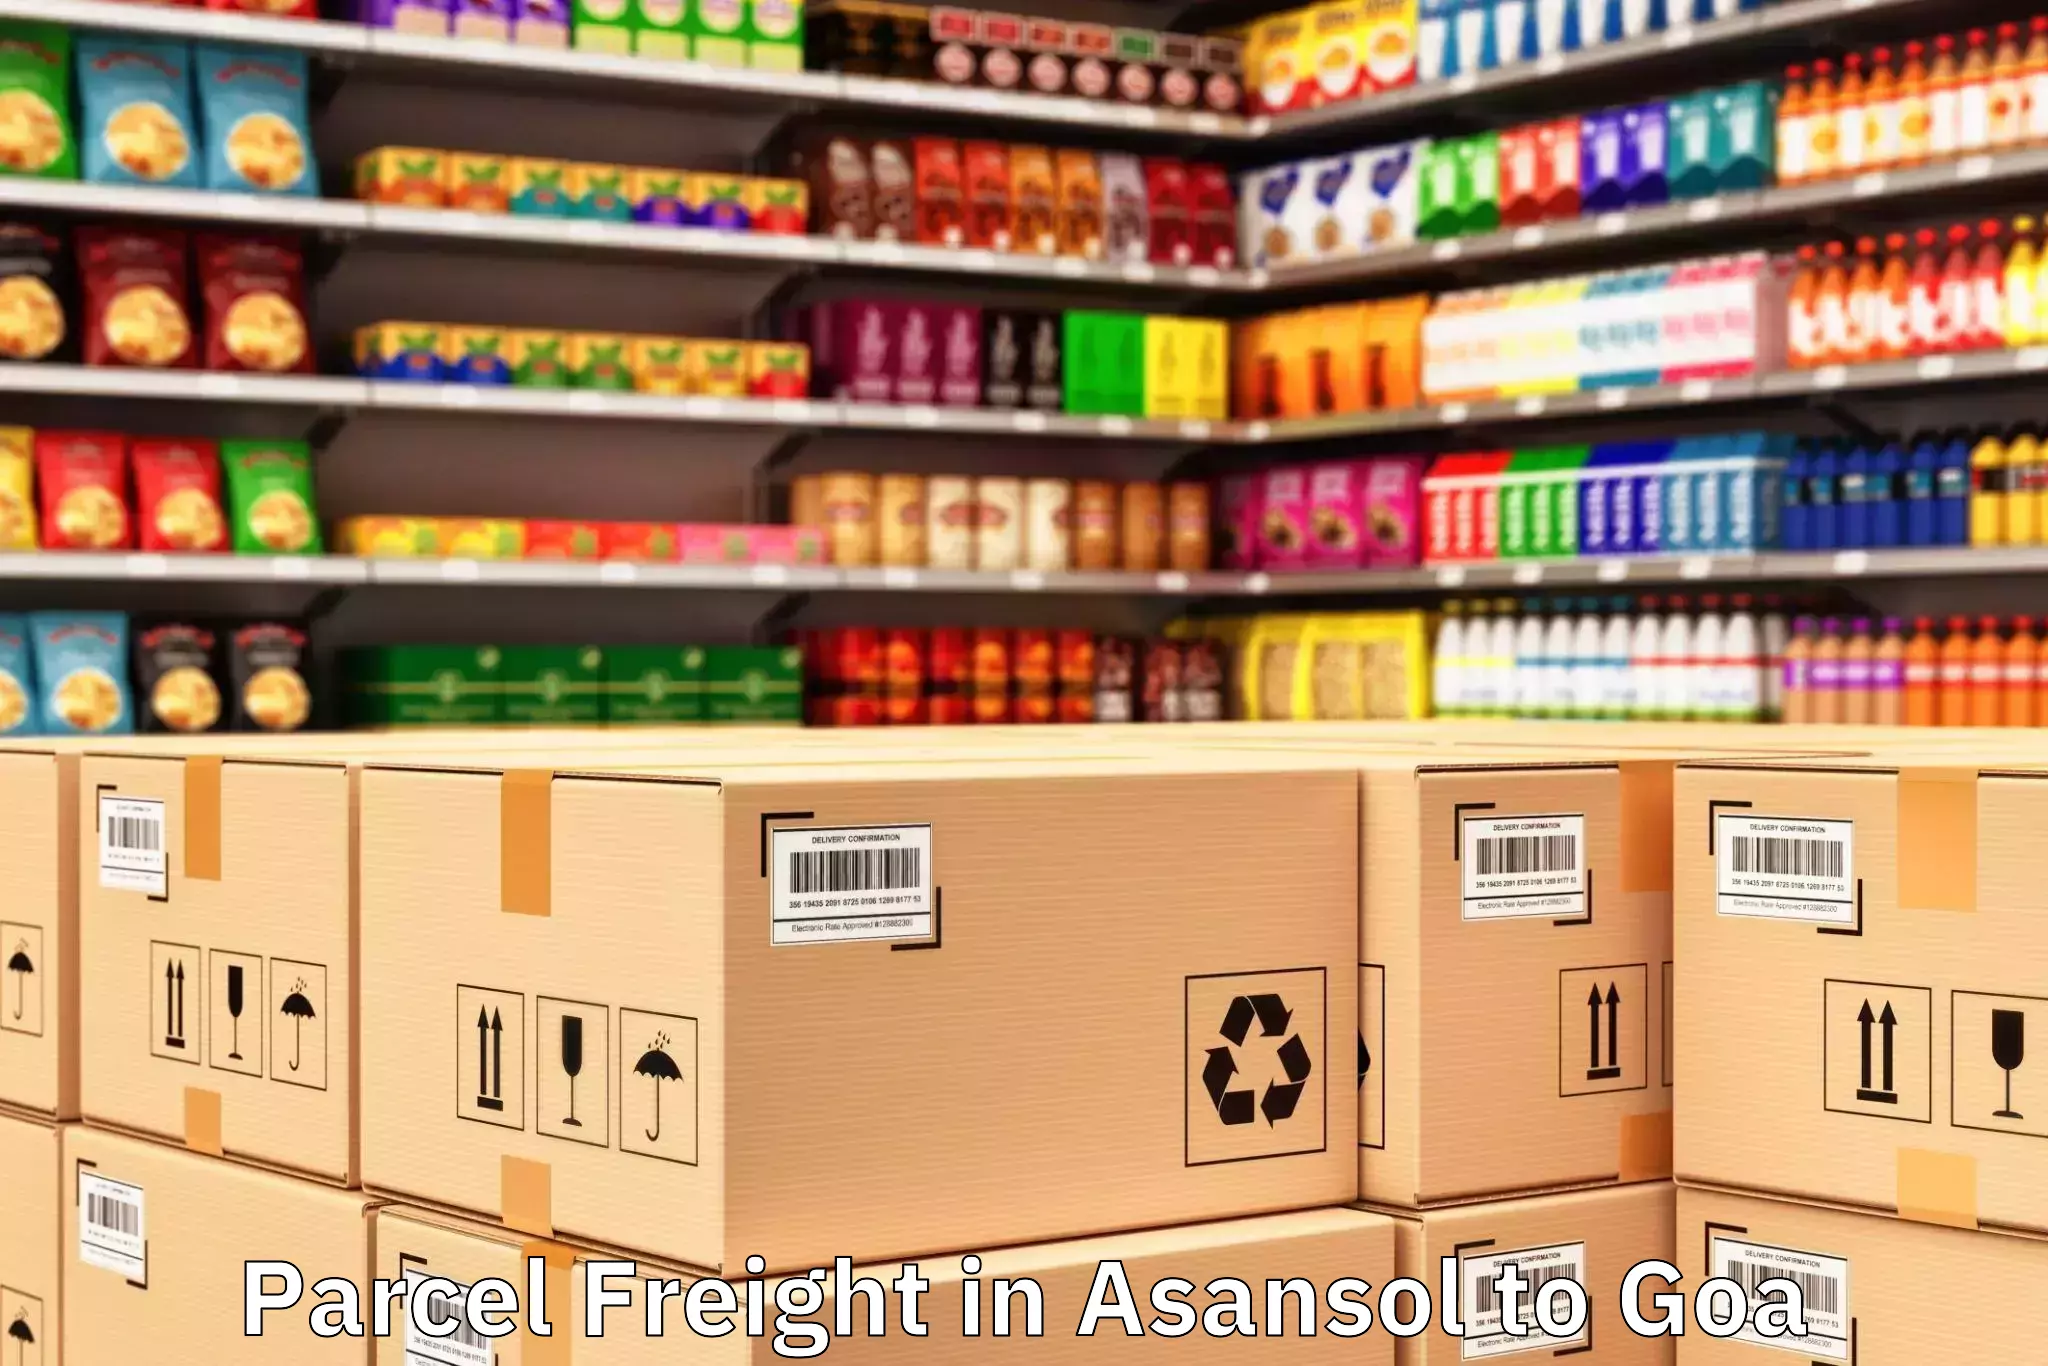 Top Asansol to Davorlim Parcel Freight Available